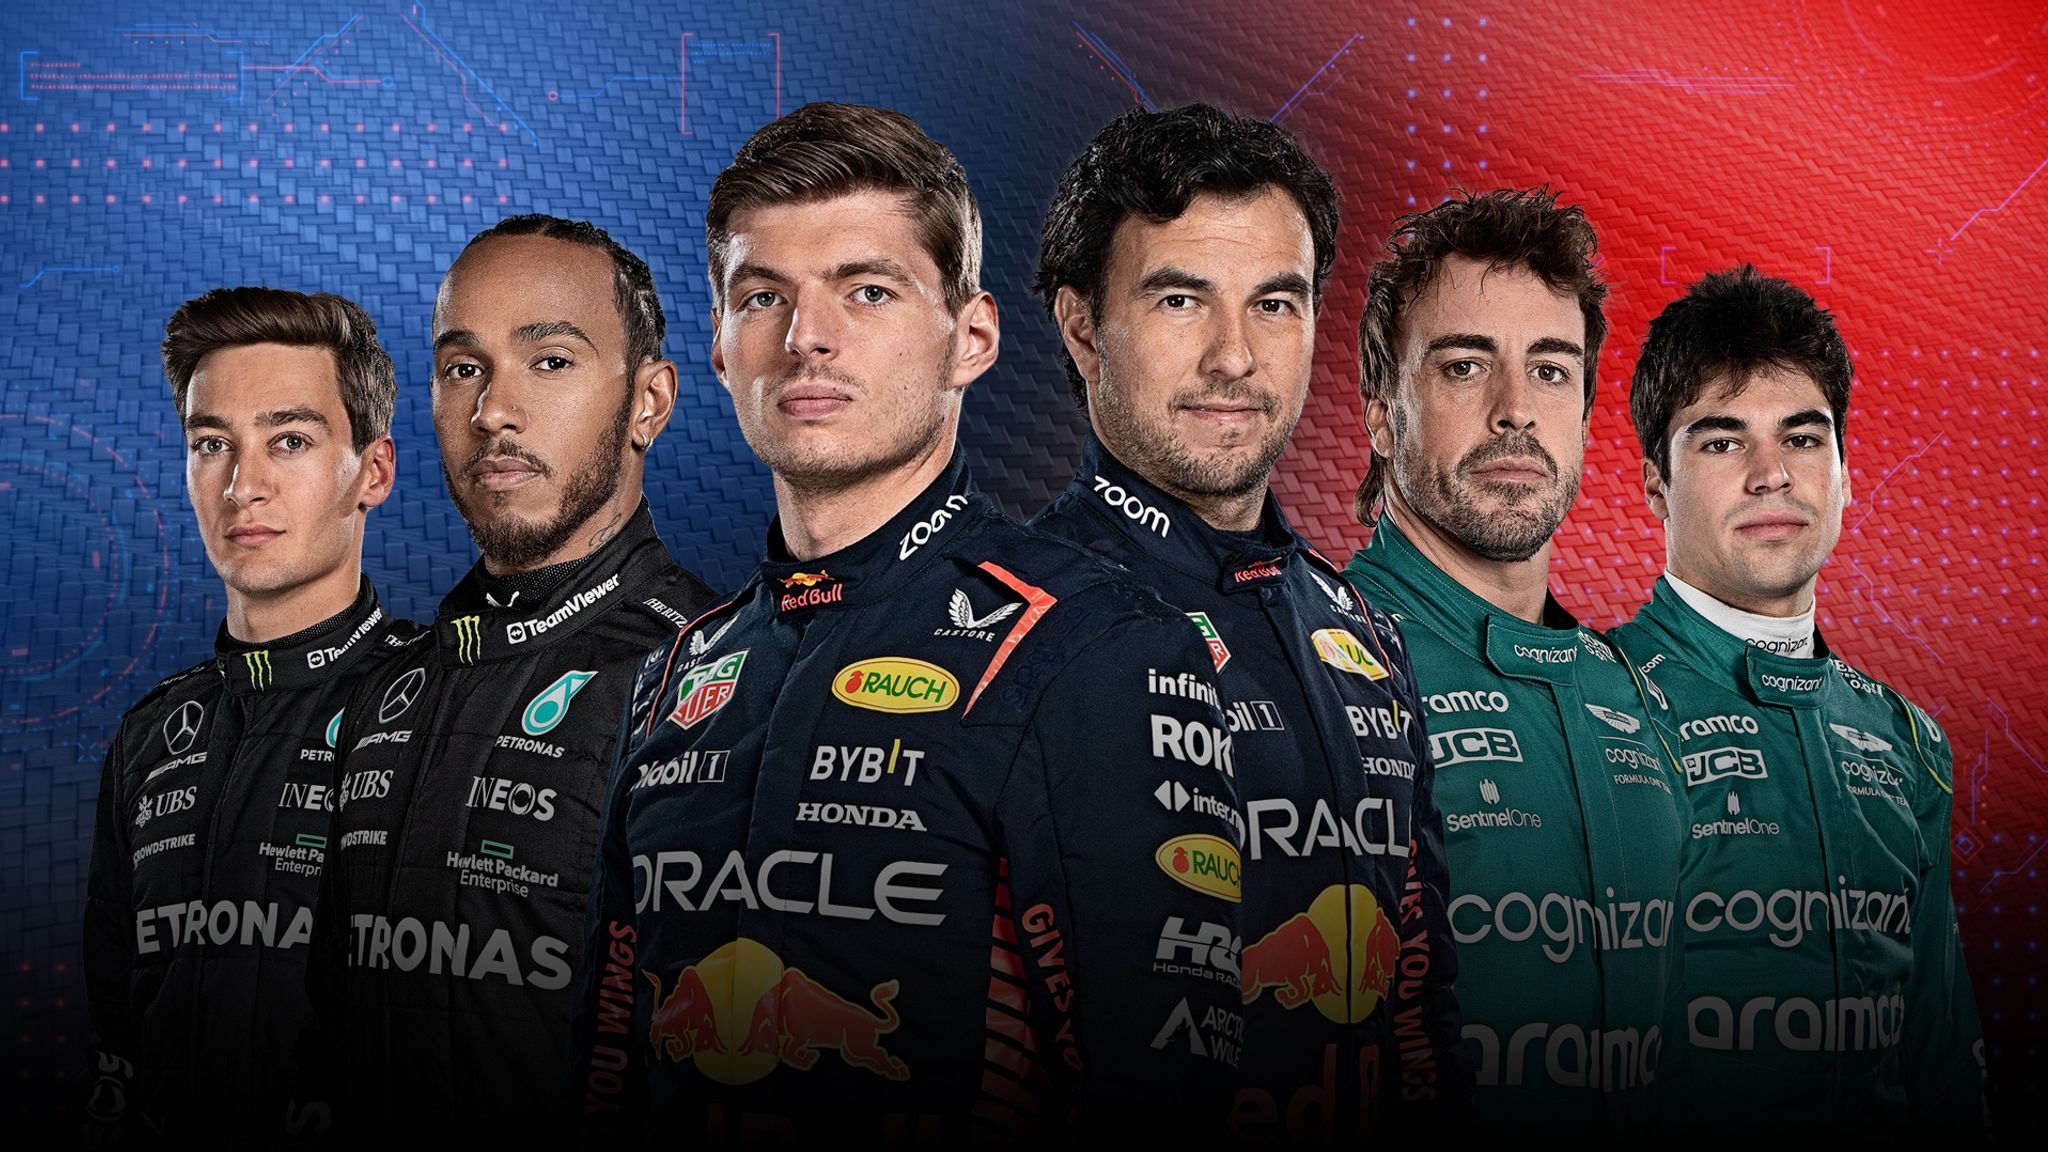 Which drivers won the qualy head-to-head